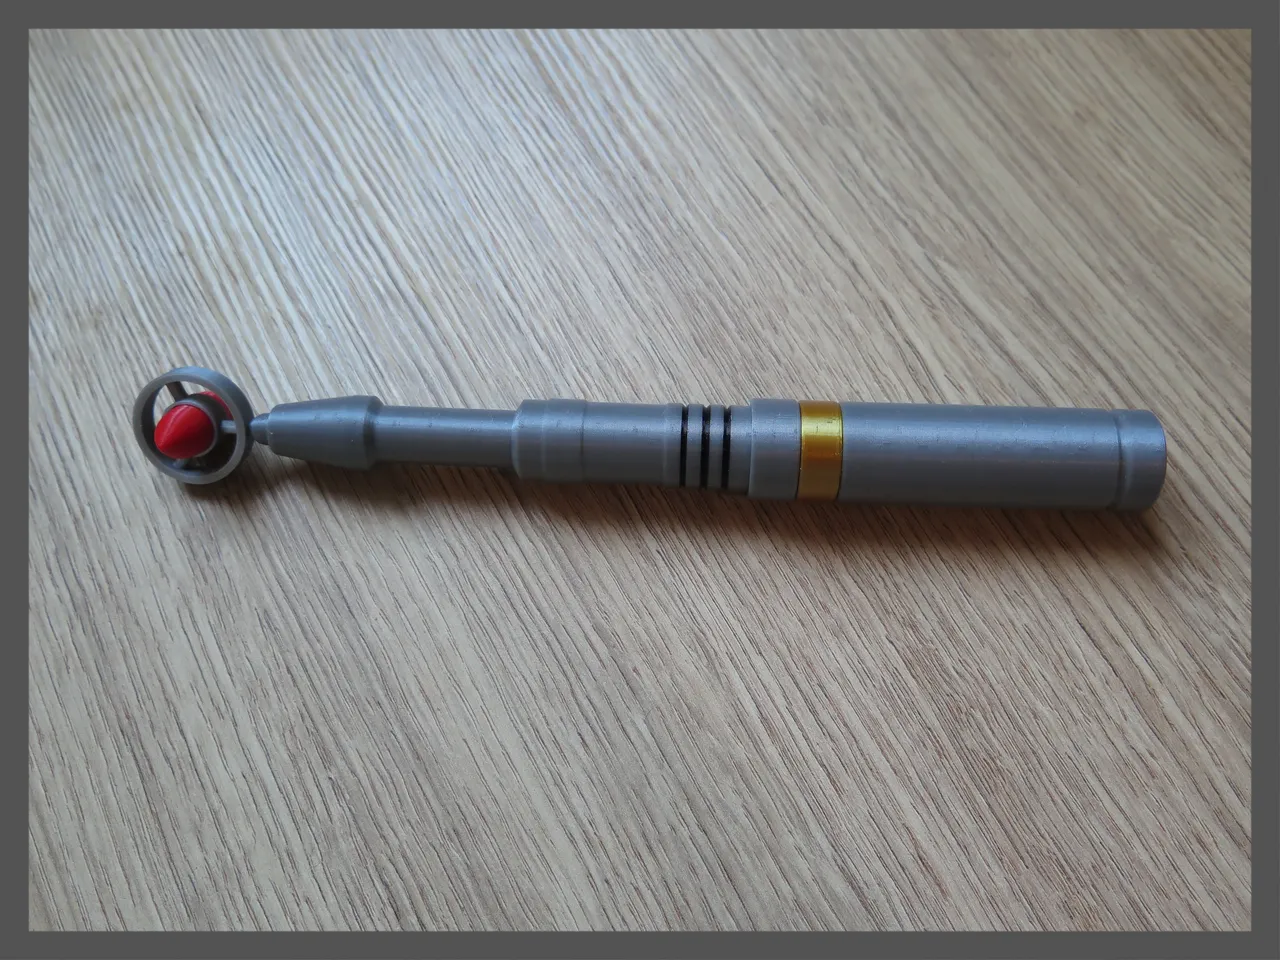 7th doctor sonic screwdriver